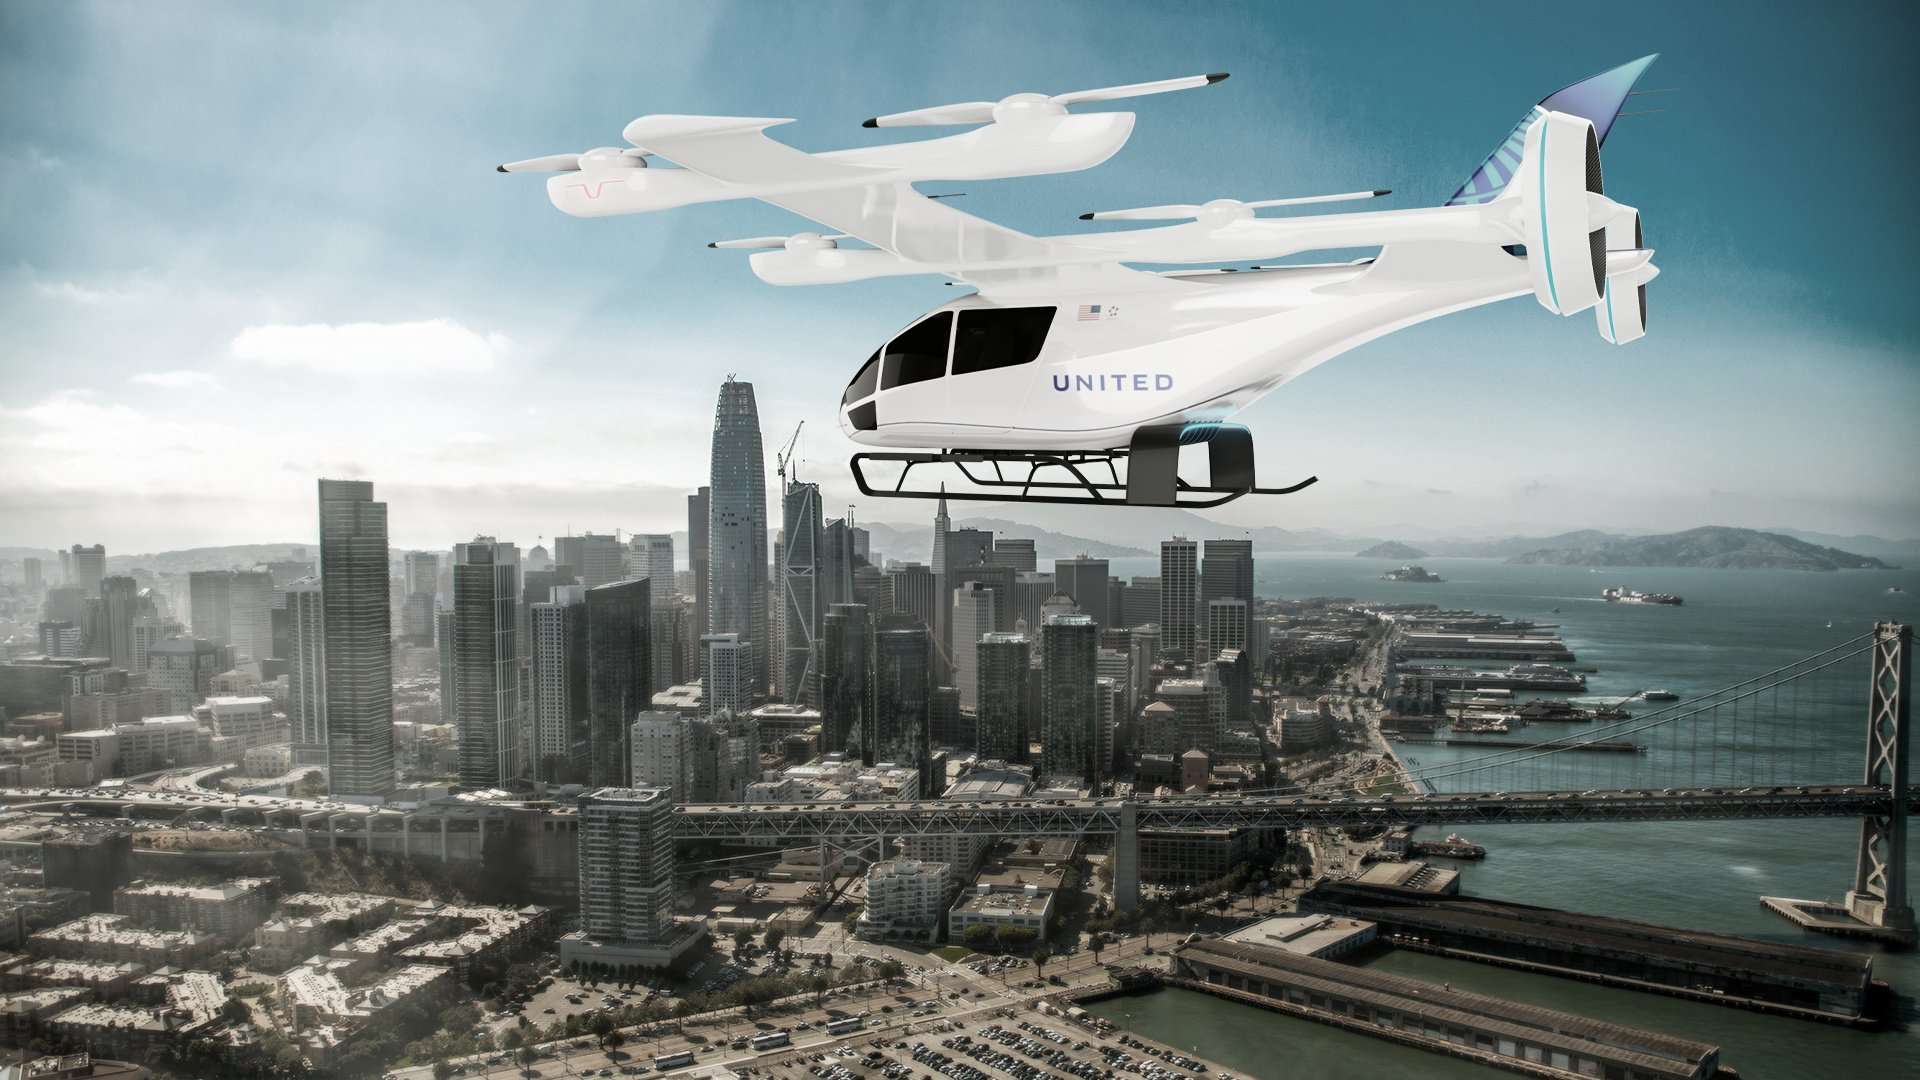 Render of United Airlines Eve Air Mobility eVTOL in flight over San Francisco.